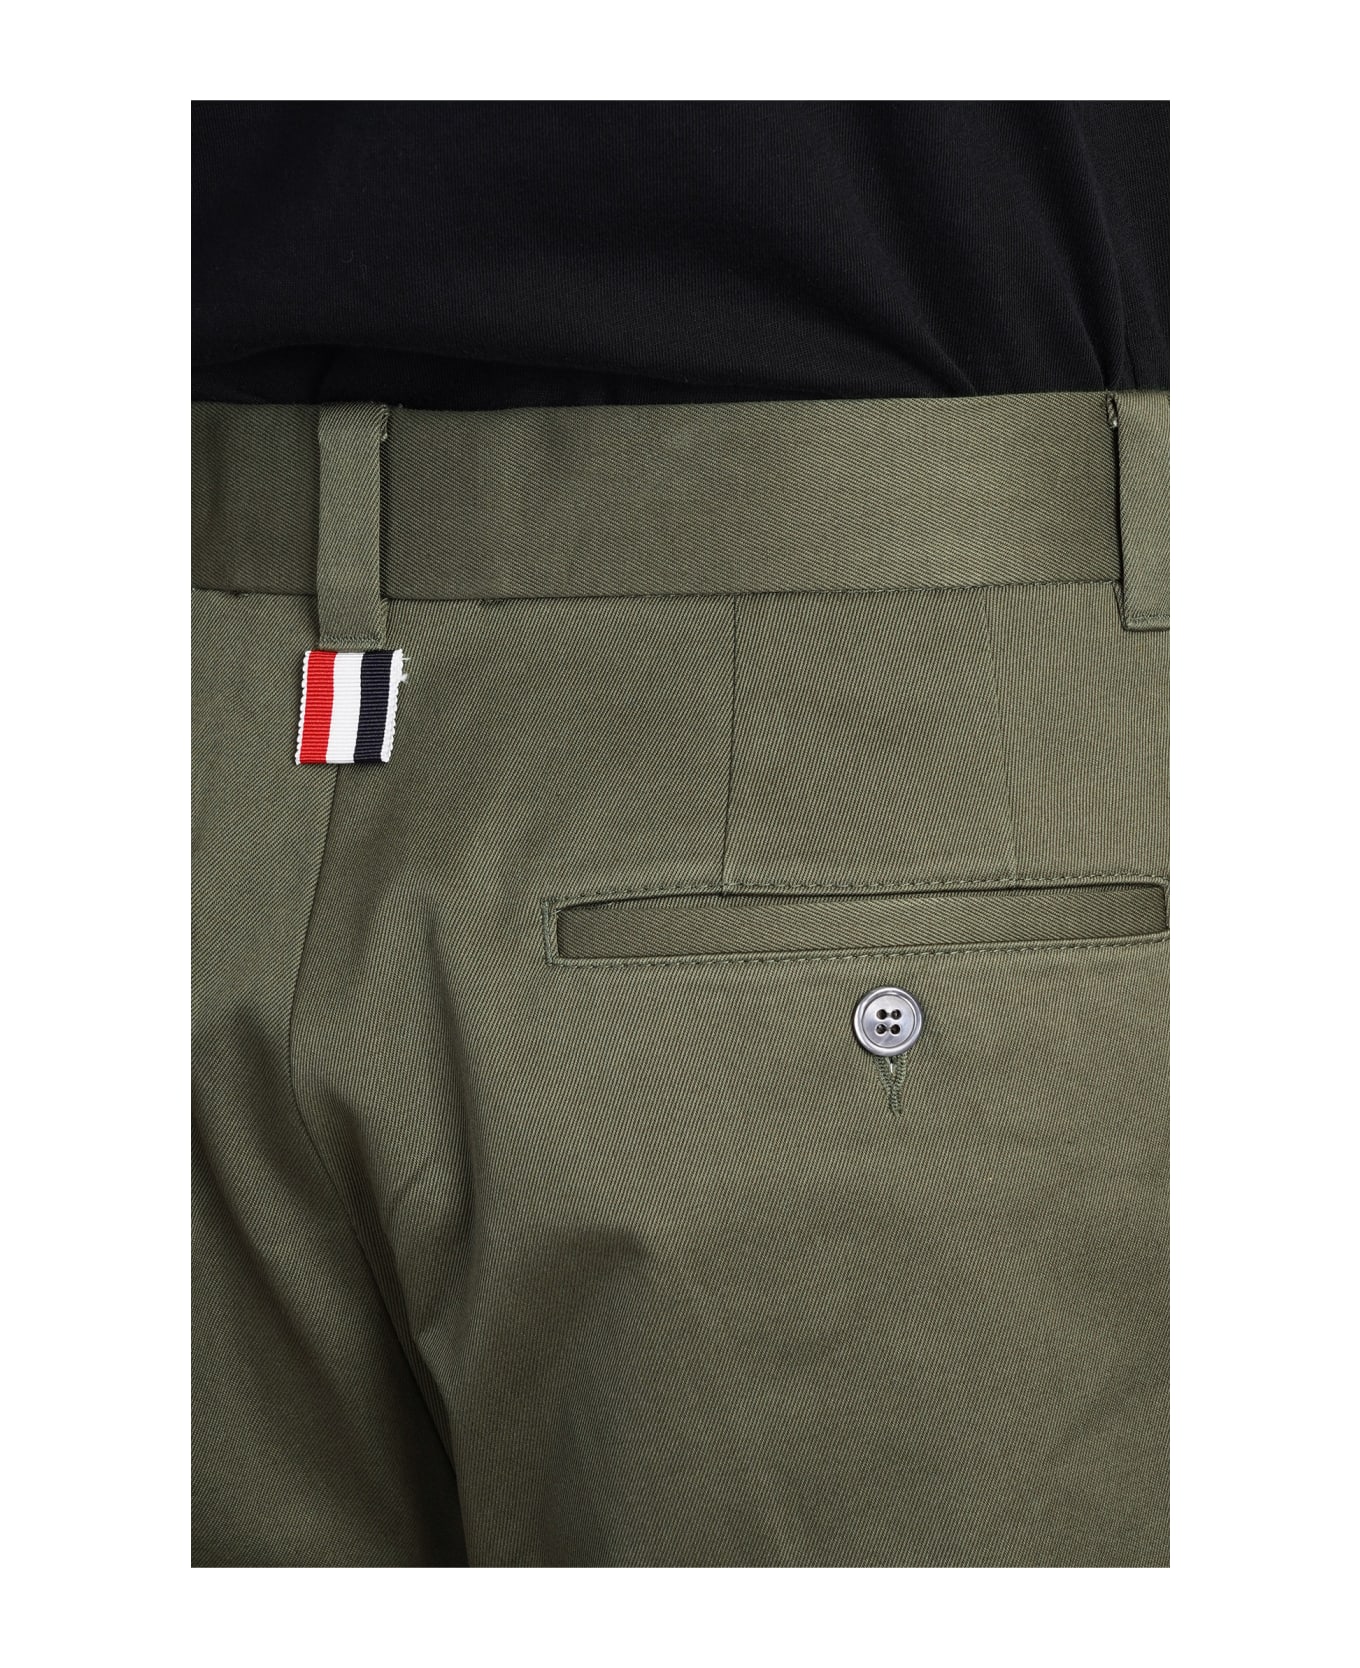 Thom Browne Pants In Green Cotton - green ボトムス